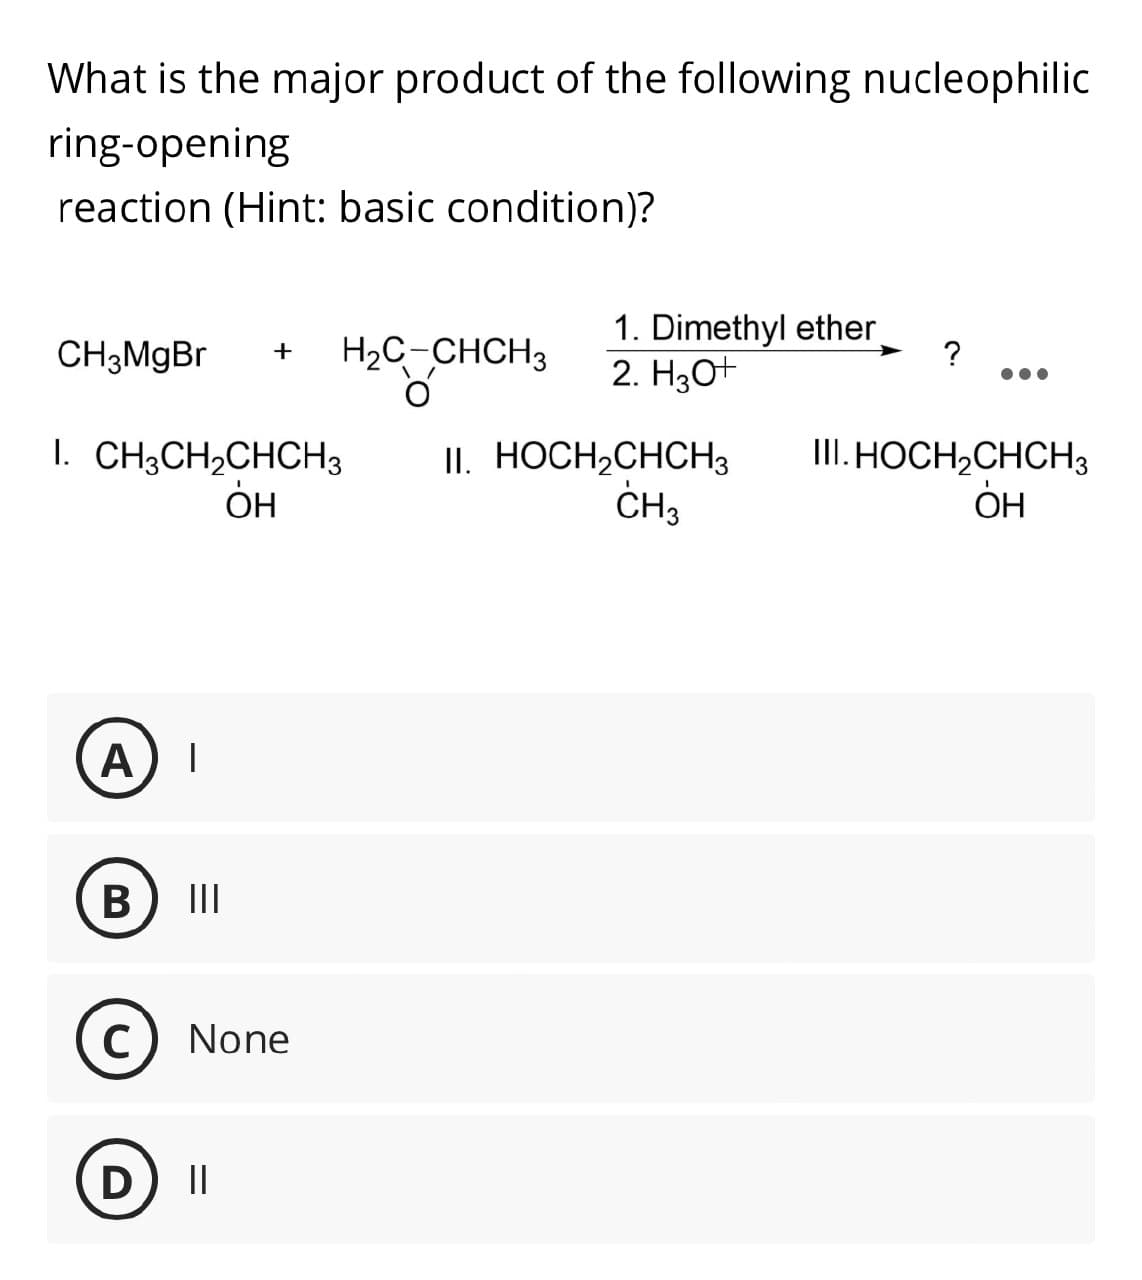 What is the major product of the following nucleophilic
ring-opening
reaction (Hint: basic condition)?
1. Dimethyl ether
CH3MgBr +
H2C CHCH3 2. H2O+
?
1. CH3CH2CHCH3
II. HOCH2CHCH3
III. HOCH2CHCH3
Он
CH3
OH
A
|
B
III
C None
D II